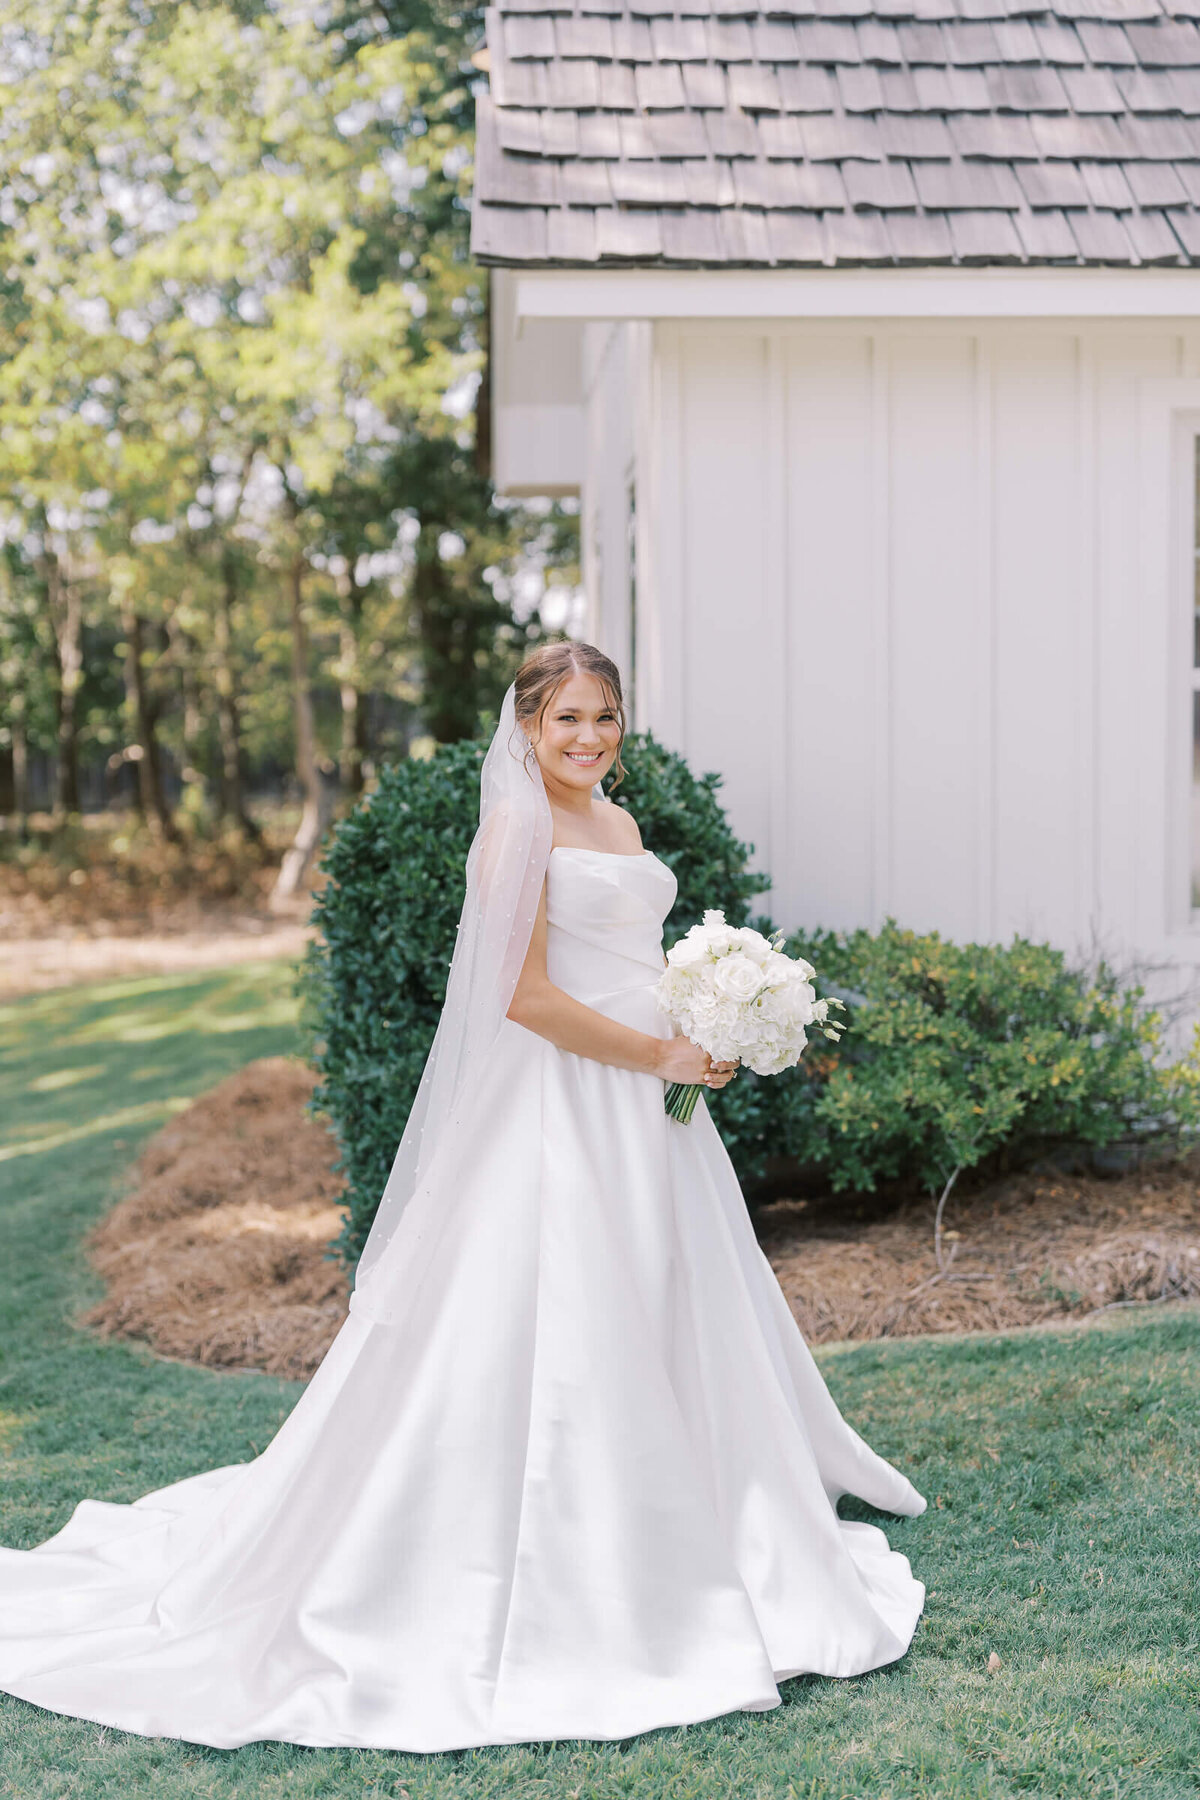 Bridal Portraits at Bridlewood Venue in Madison ms